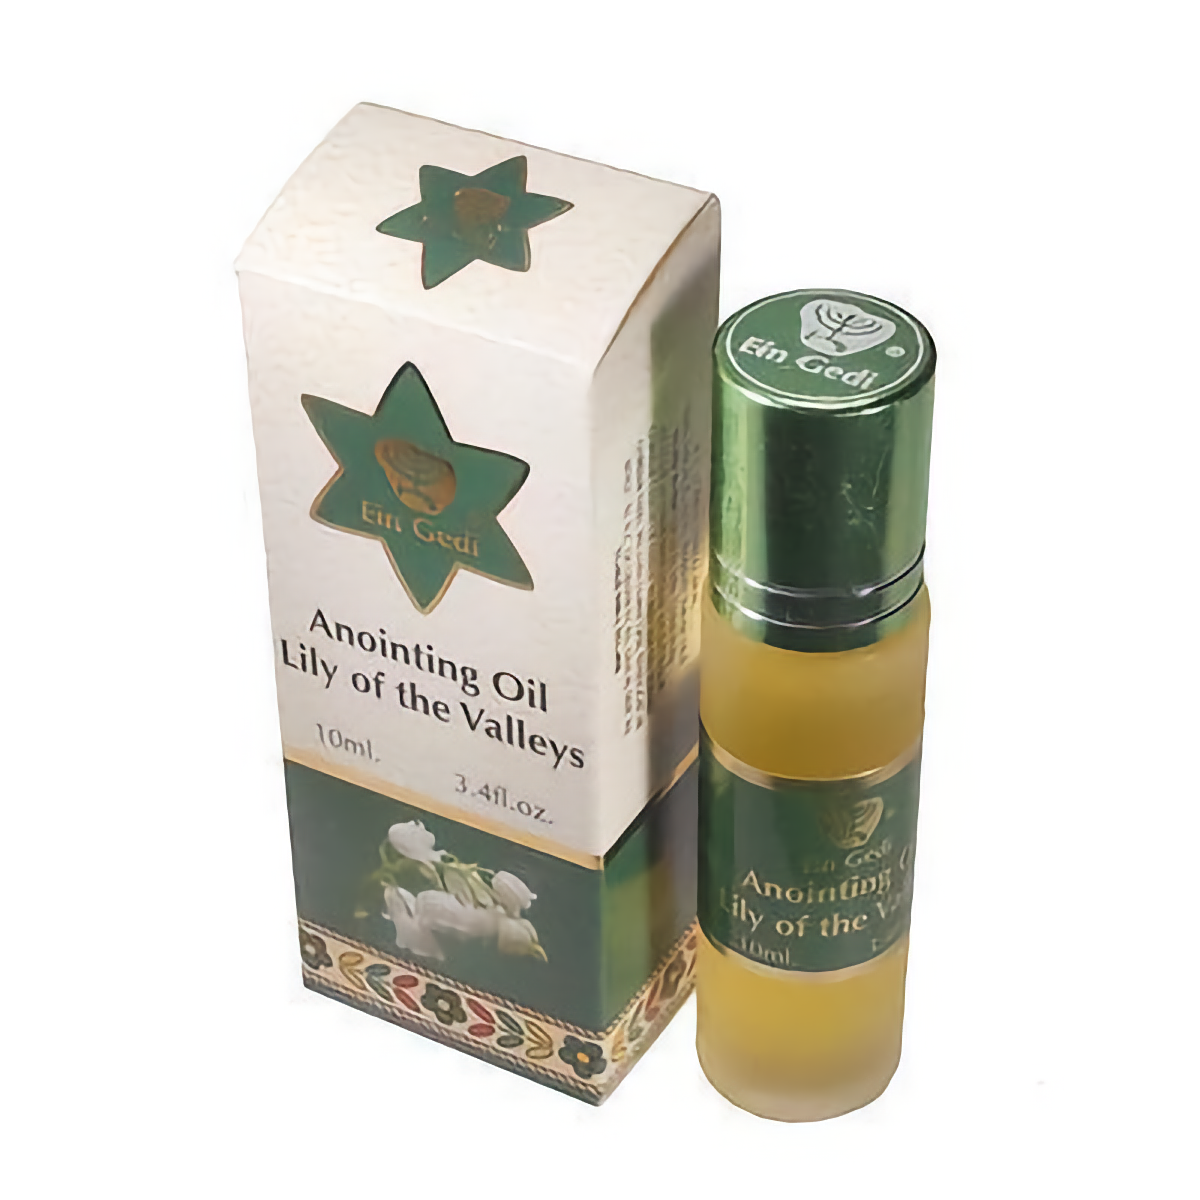 5 x Roll On Anointing Oil Lily Of The Valleys 10 ml - 0.34 oz Holyland Jerusalem